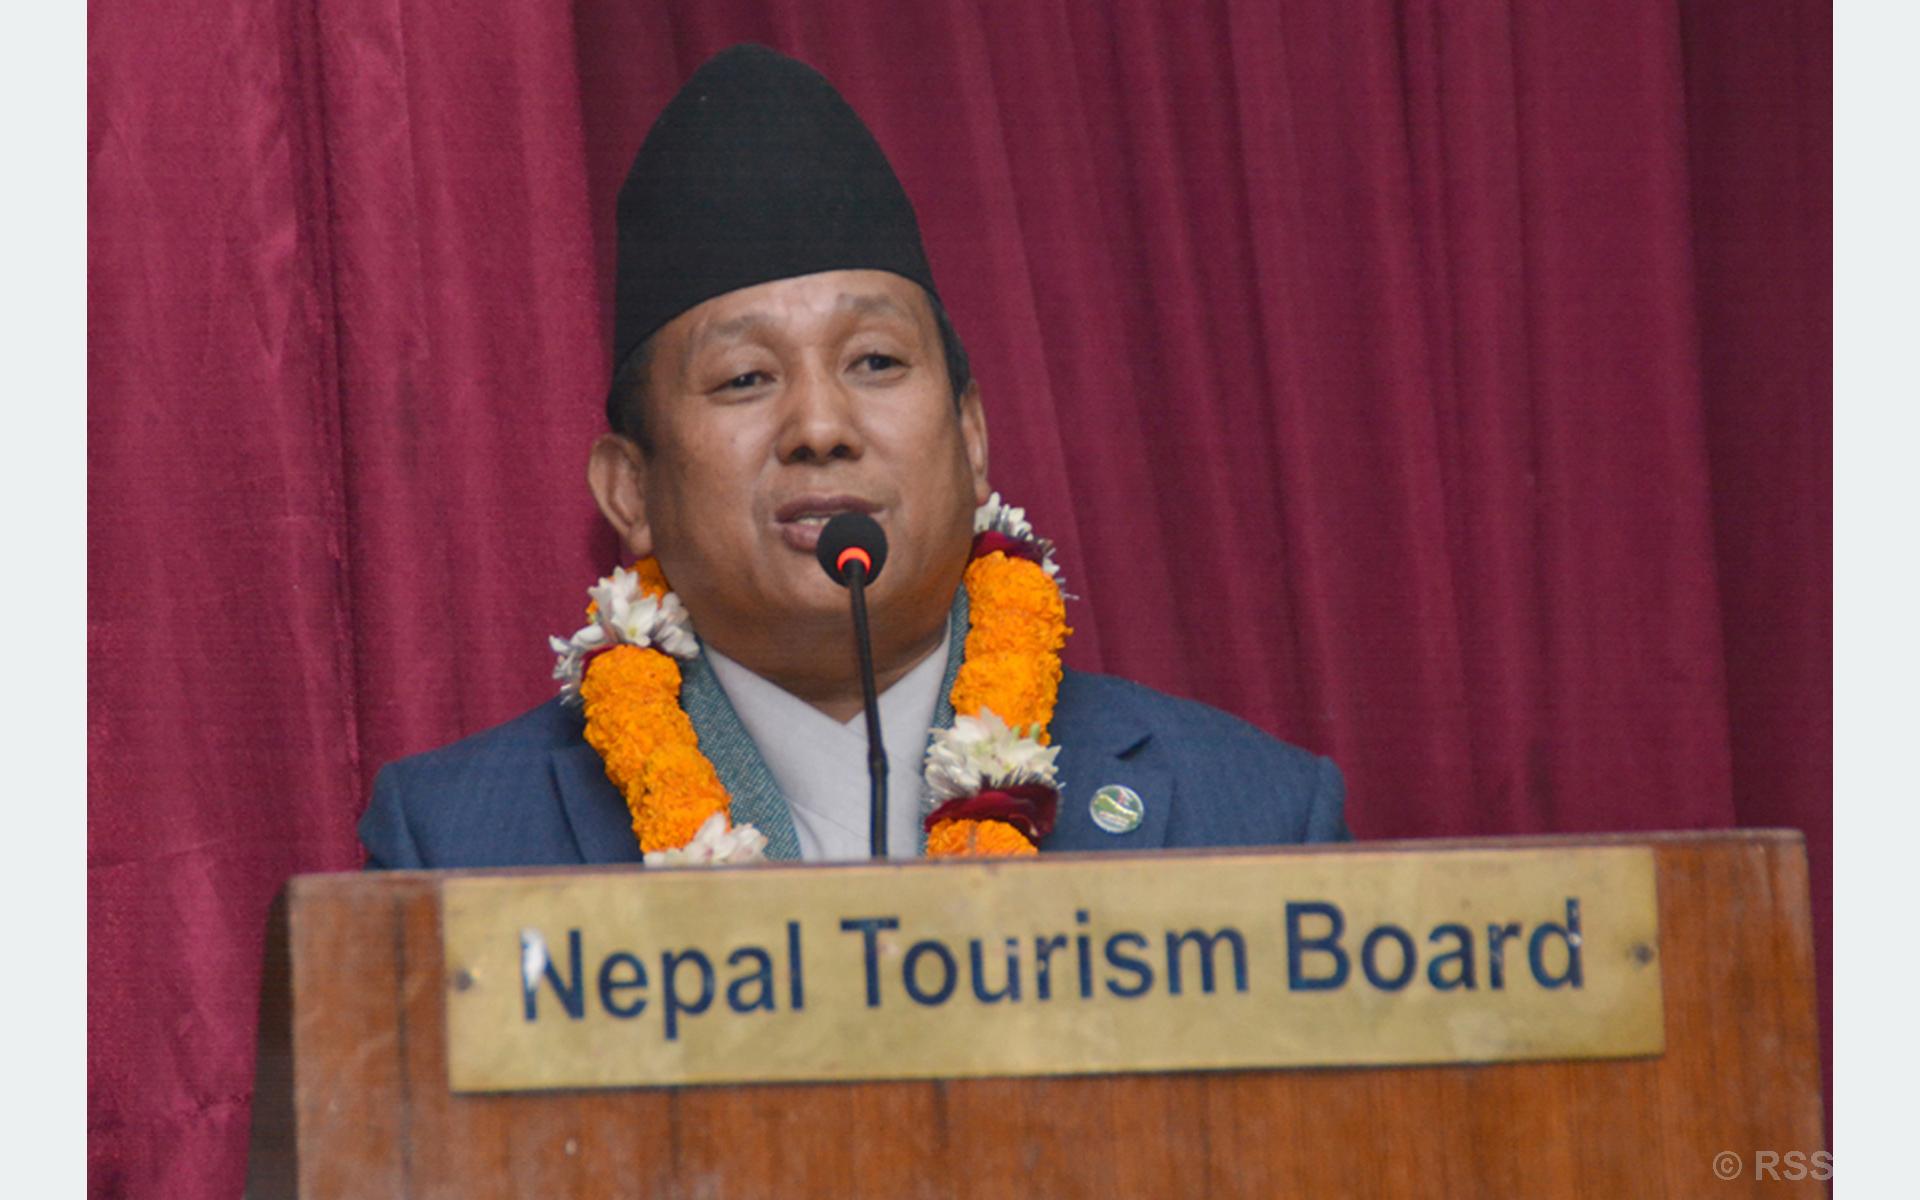 Country will move ahead towards prosperity along with fresh mandate: Minister Gurung